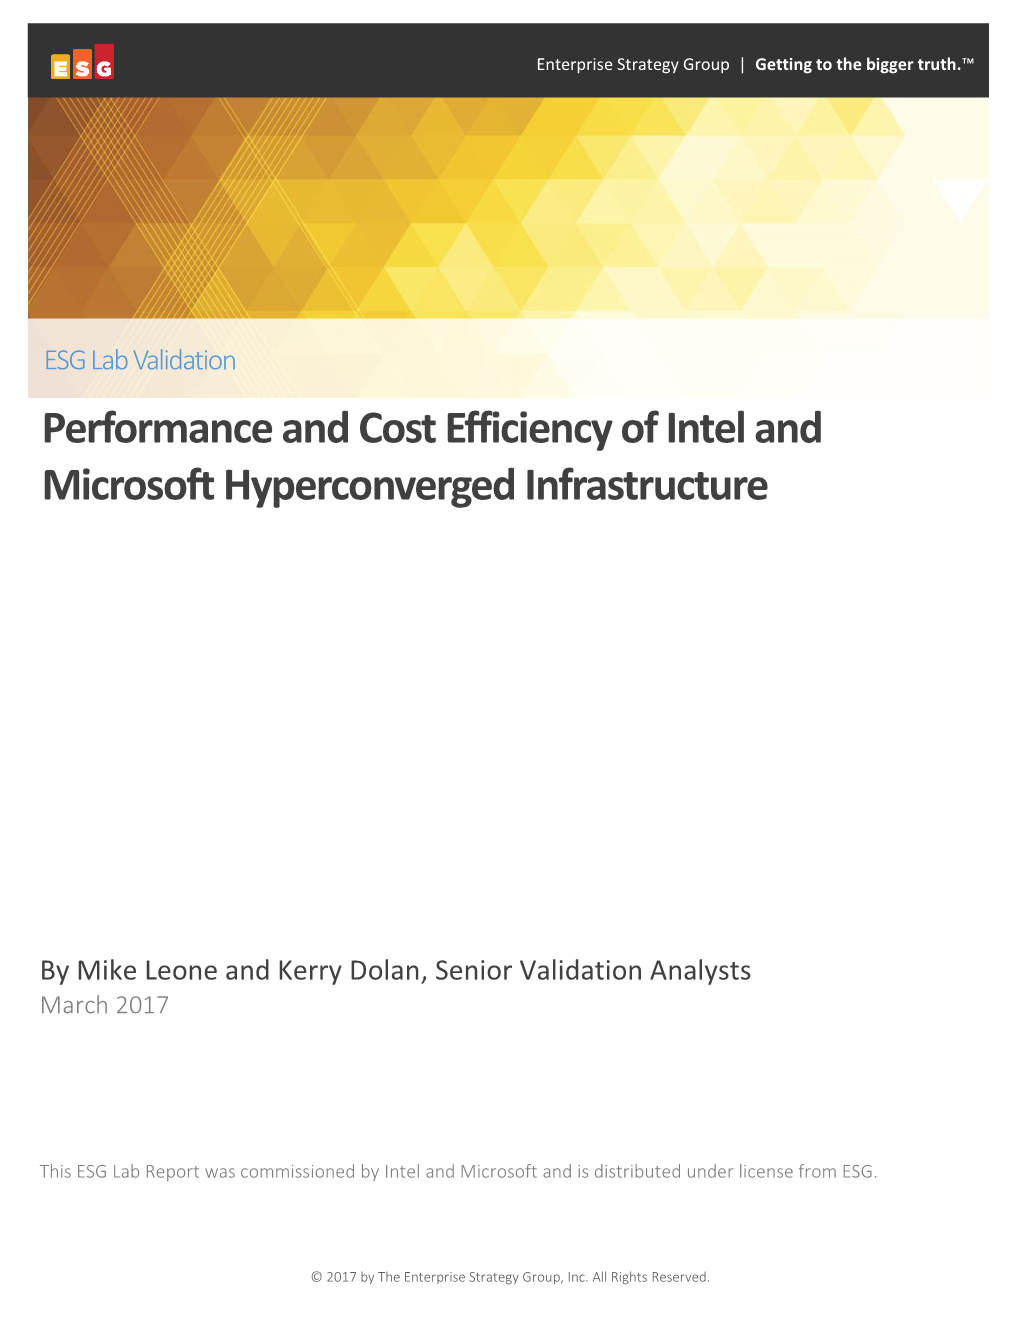 Performance and Cost Efficiency of Intel and Microsoft Hyperconverged Infrastructure